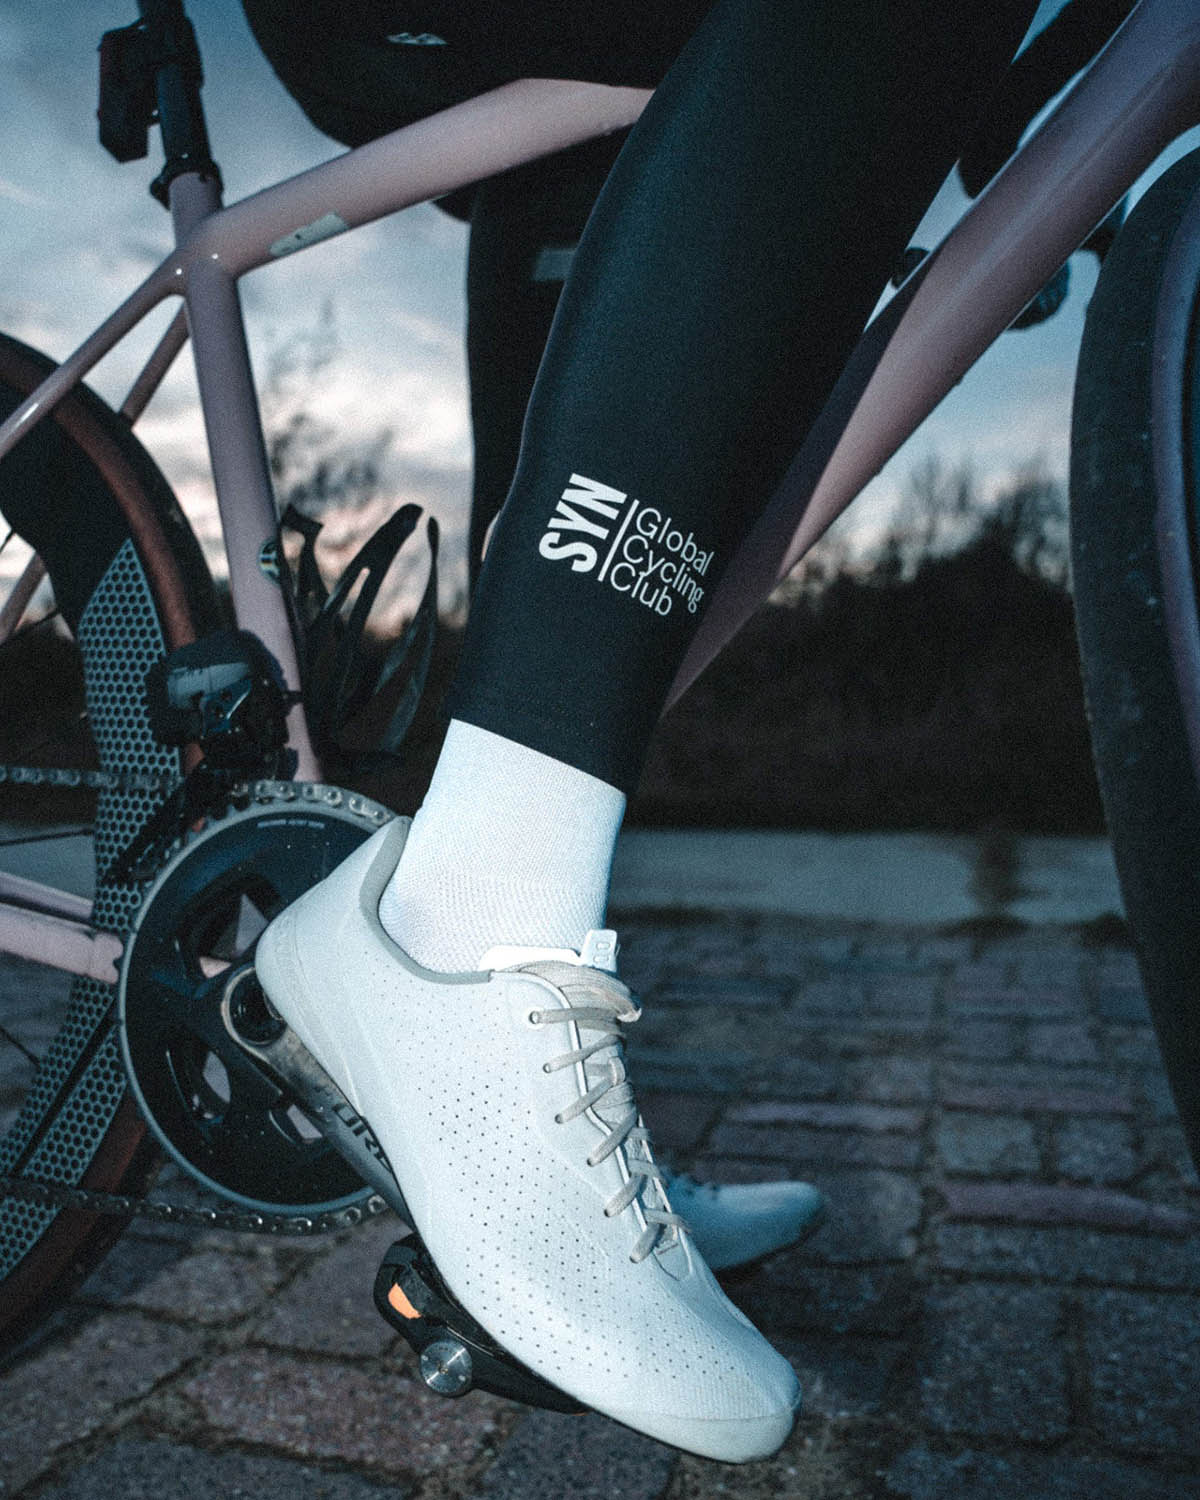 Syndicate Thermal Leg Warmers